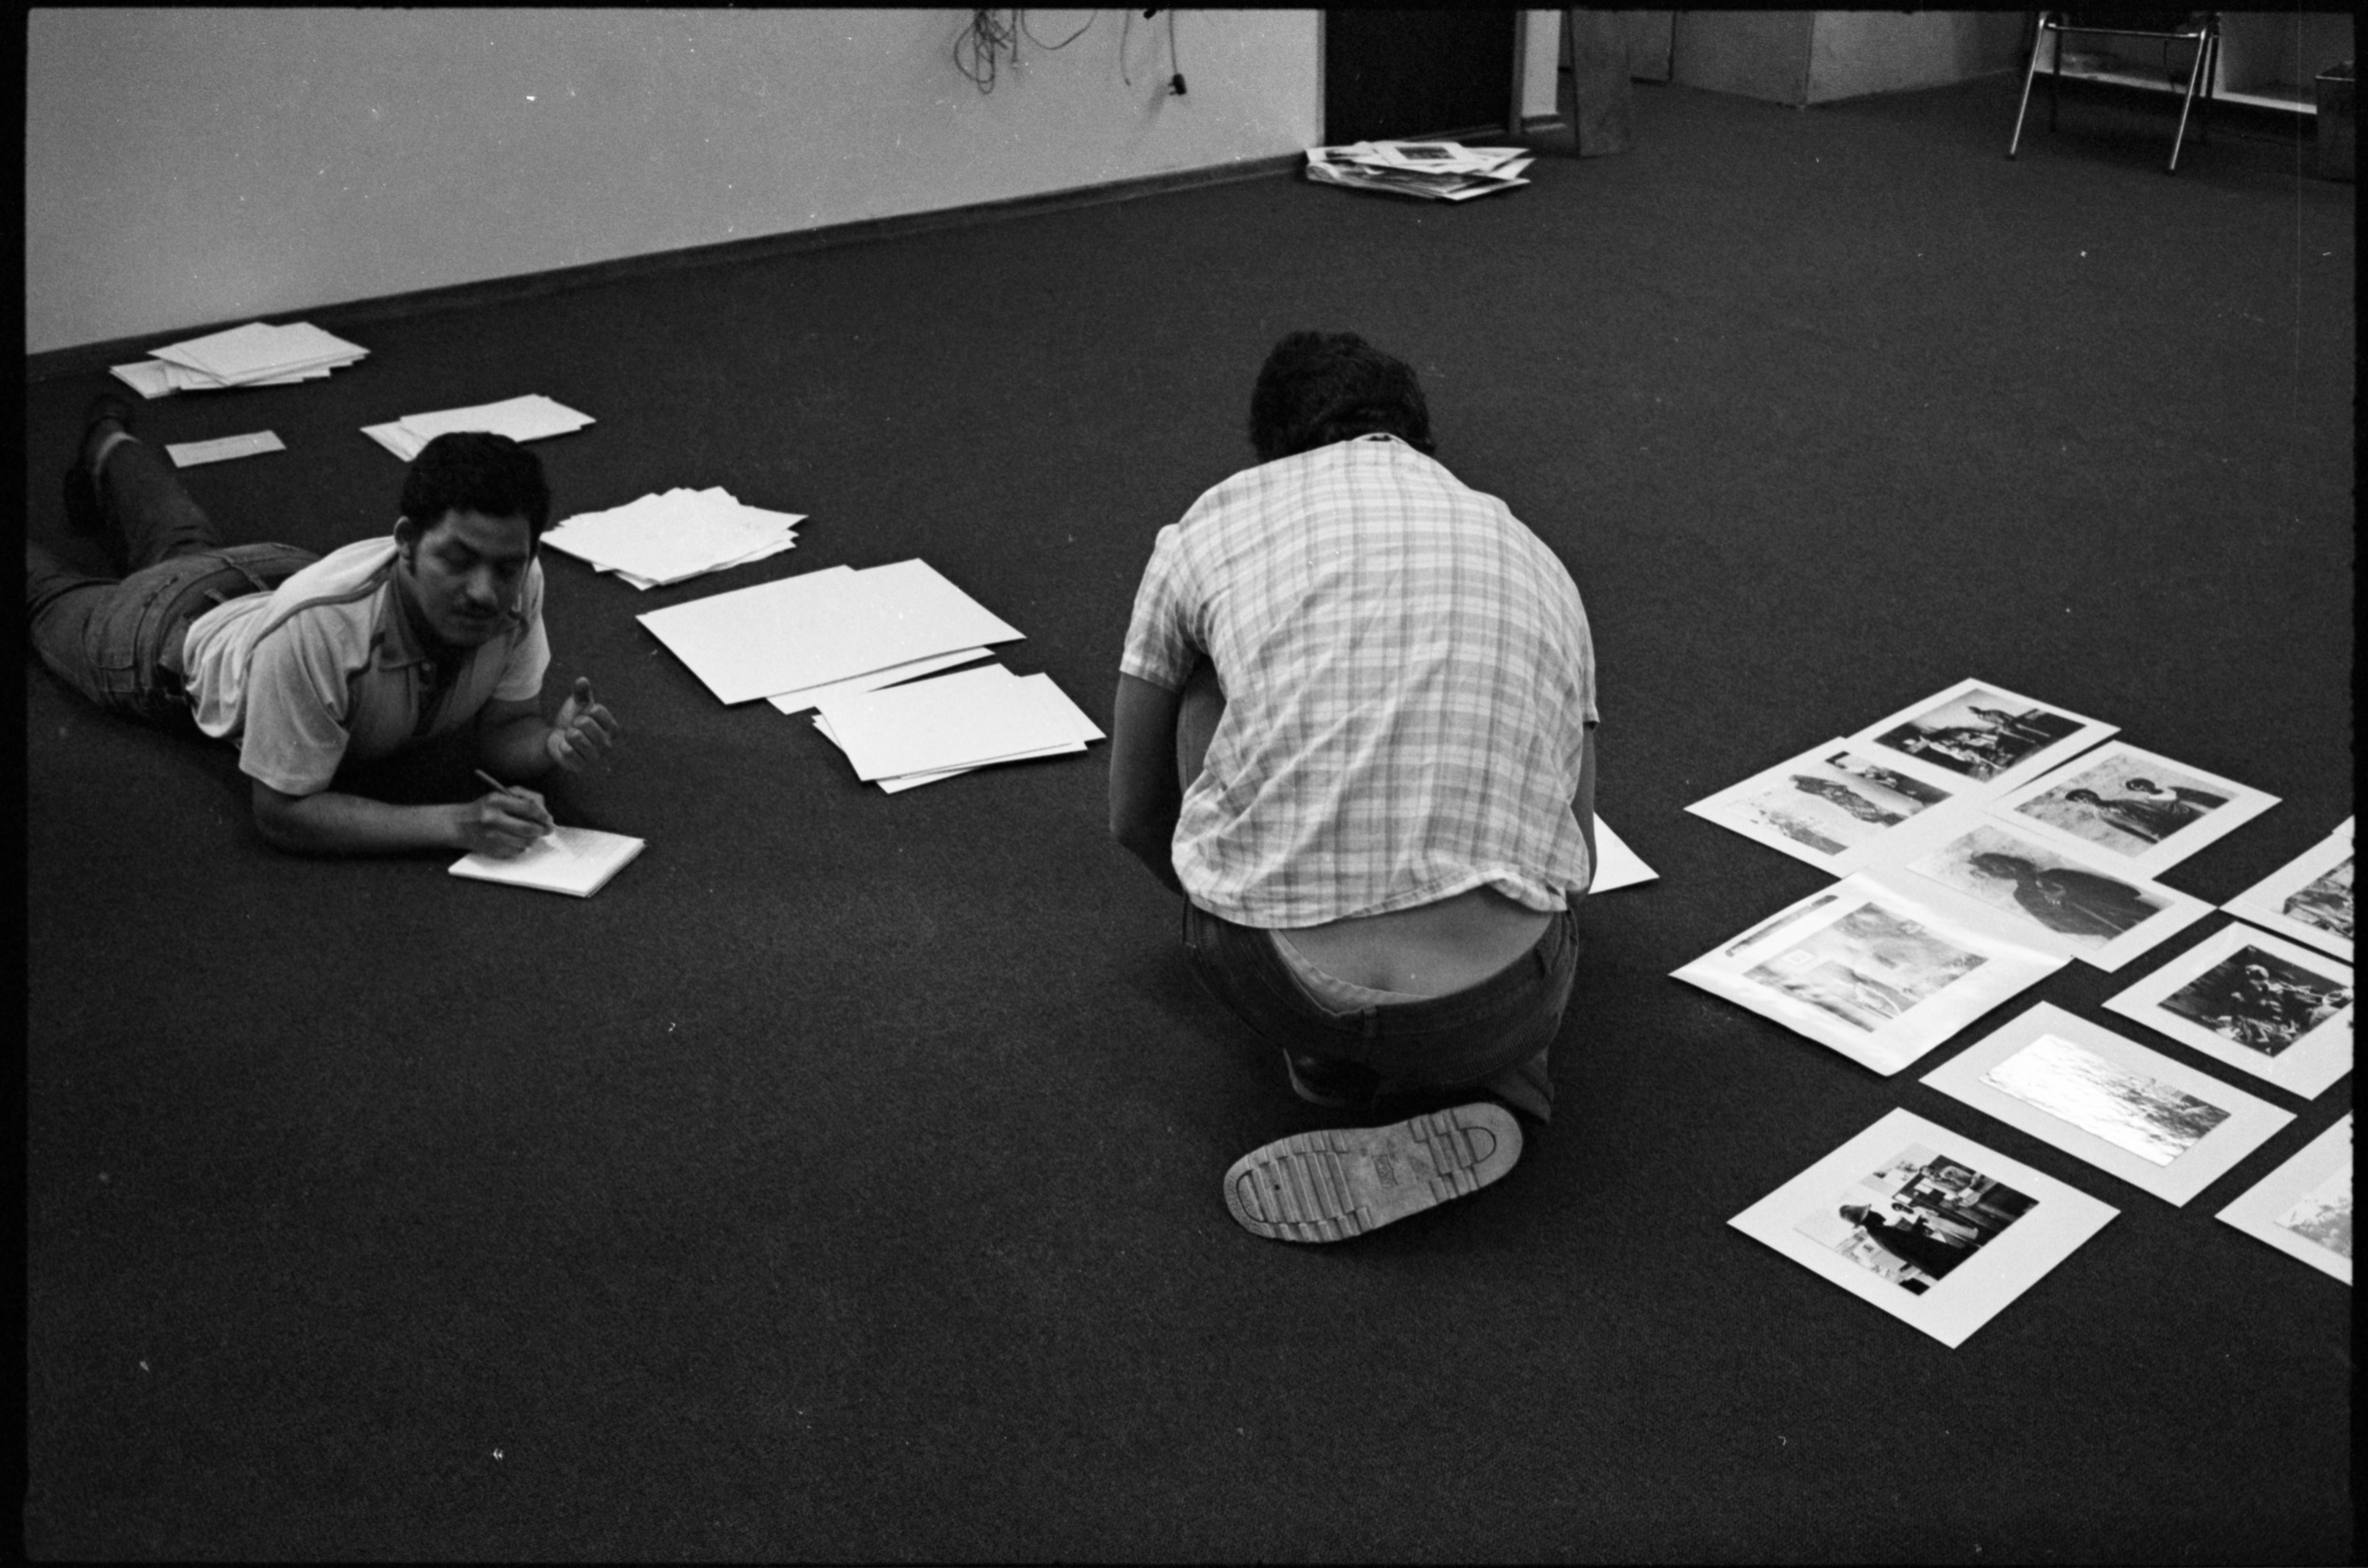 Paul Weinberg and Chris Van Wyk selecting images for the first Staffrider exhibition 1983